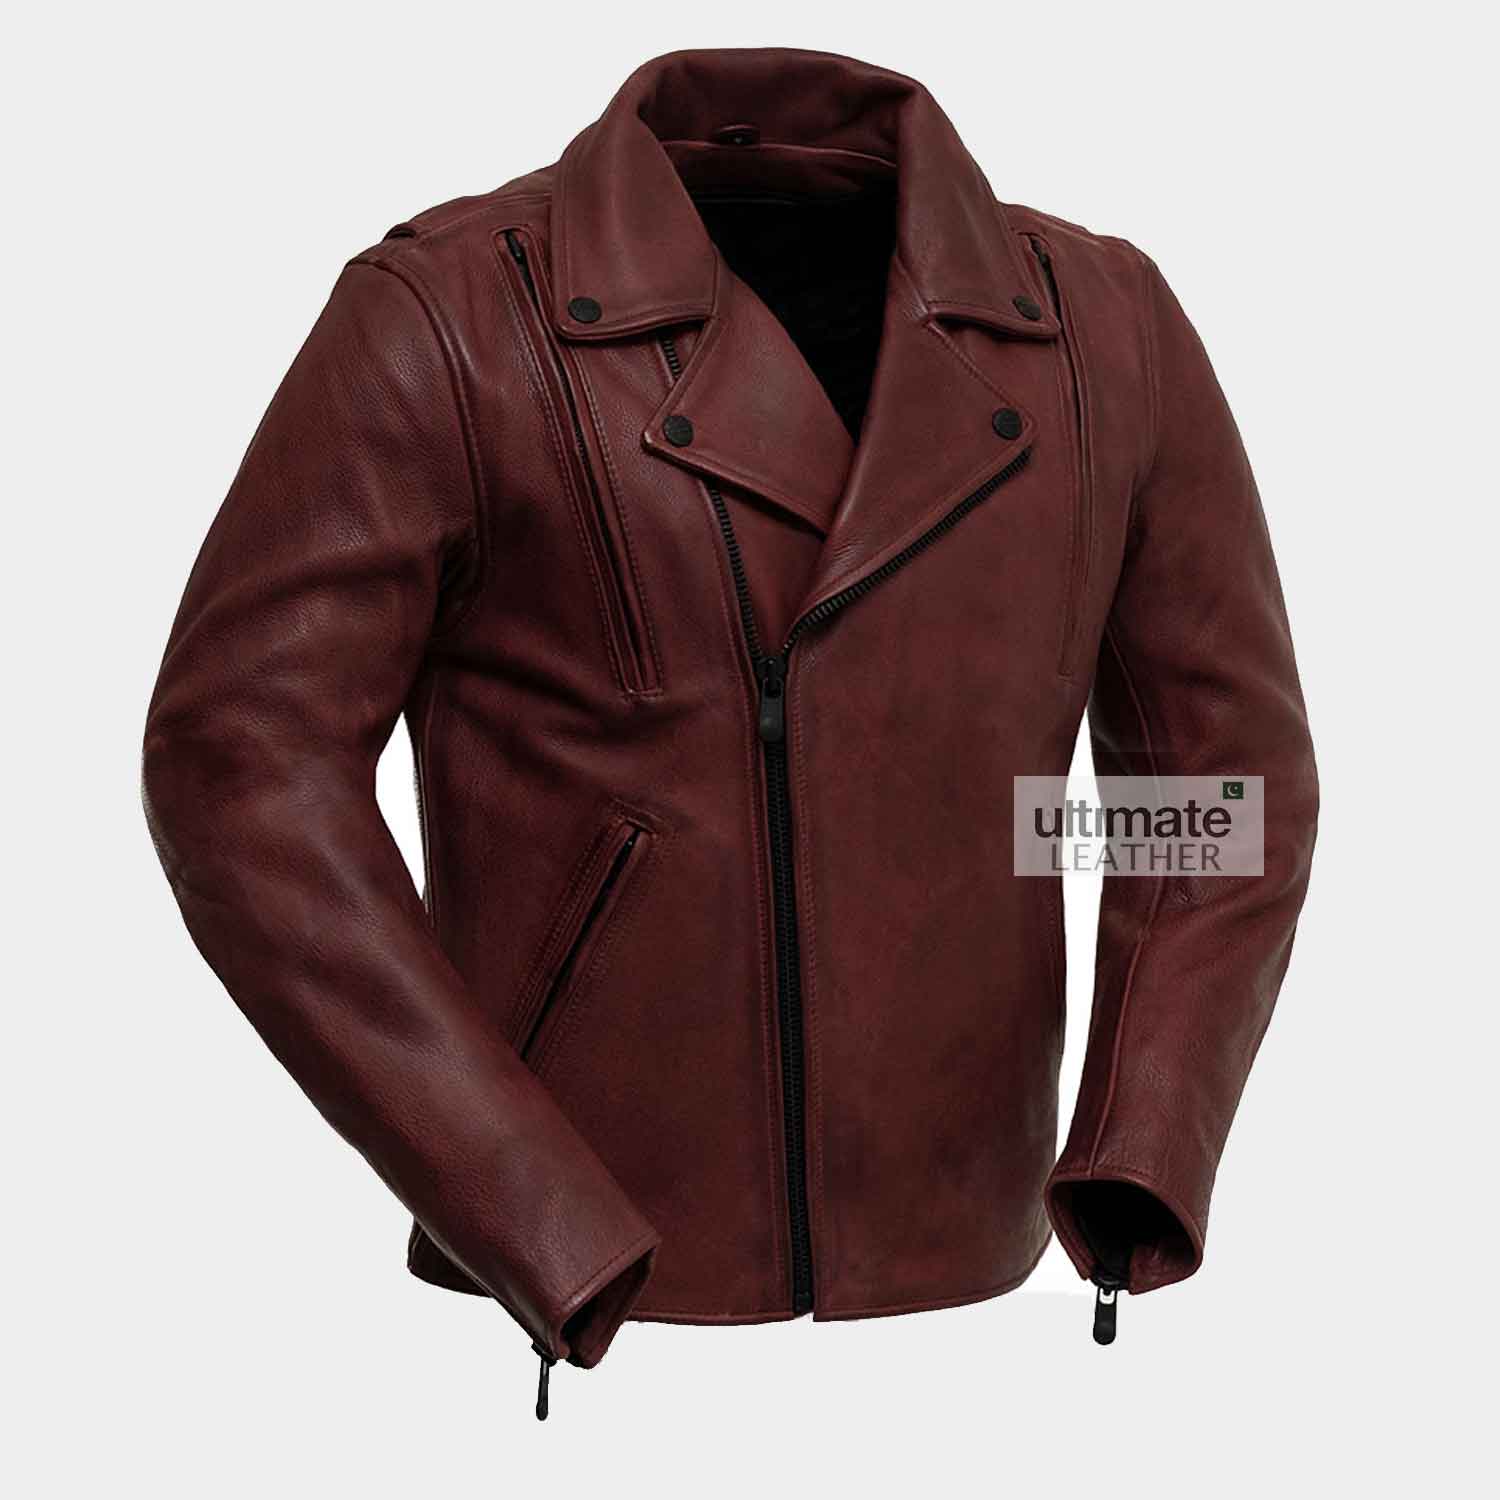 Get Mens Double Breasted Tan Brown Motorcycle Leather Jacket